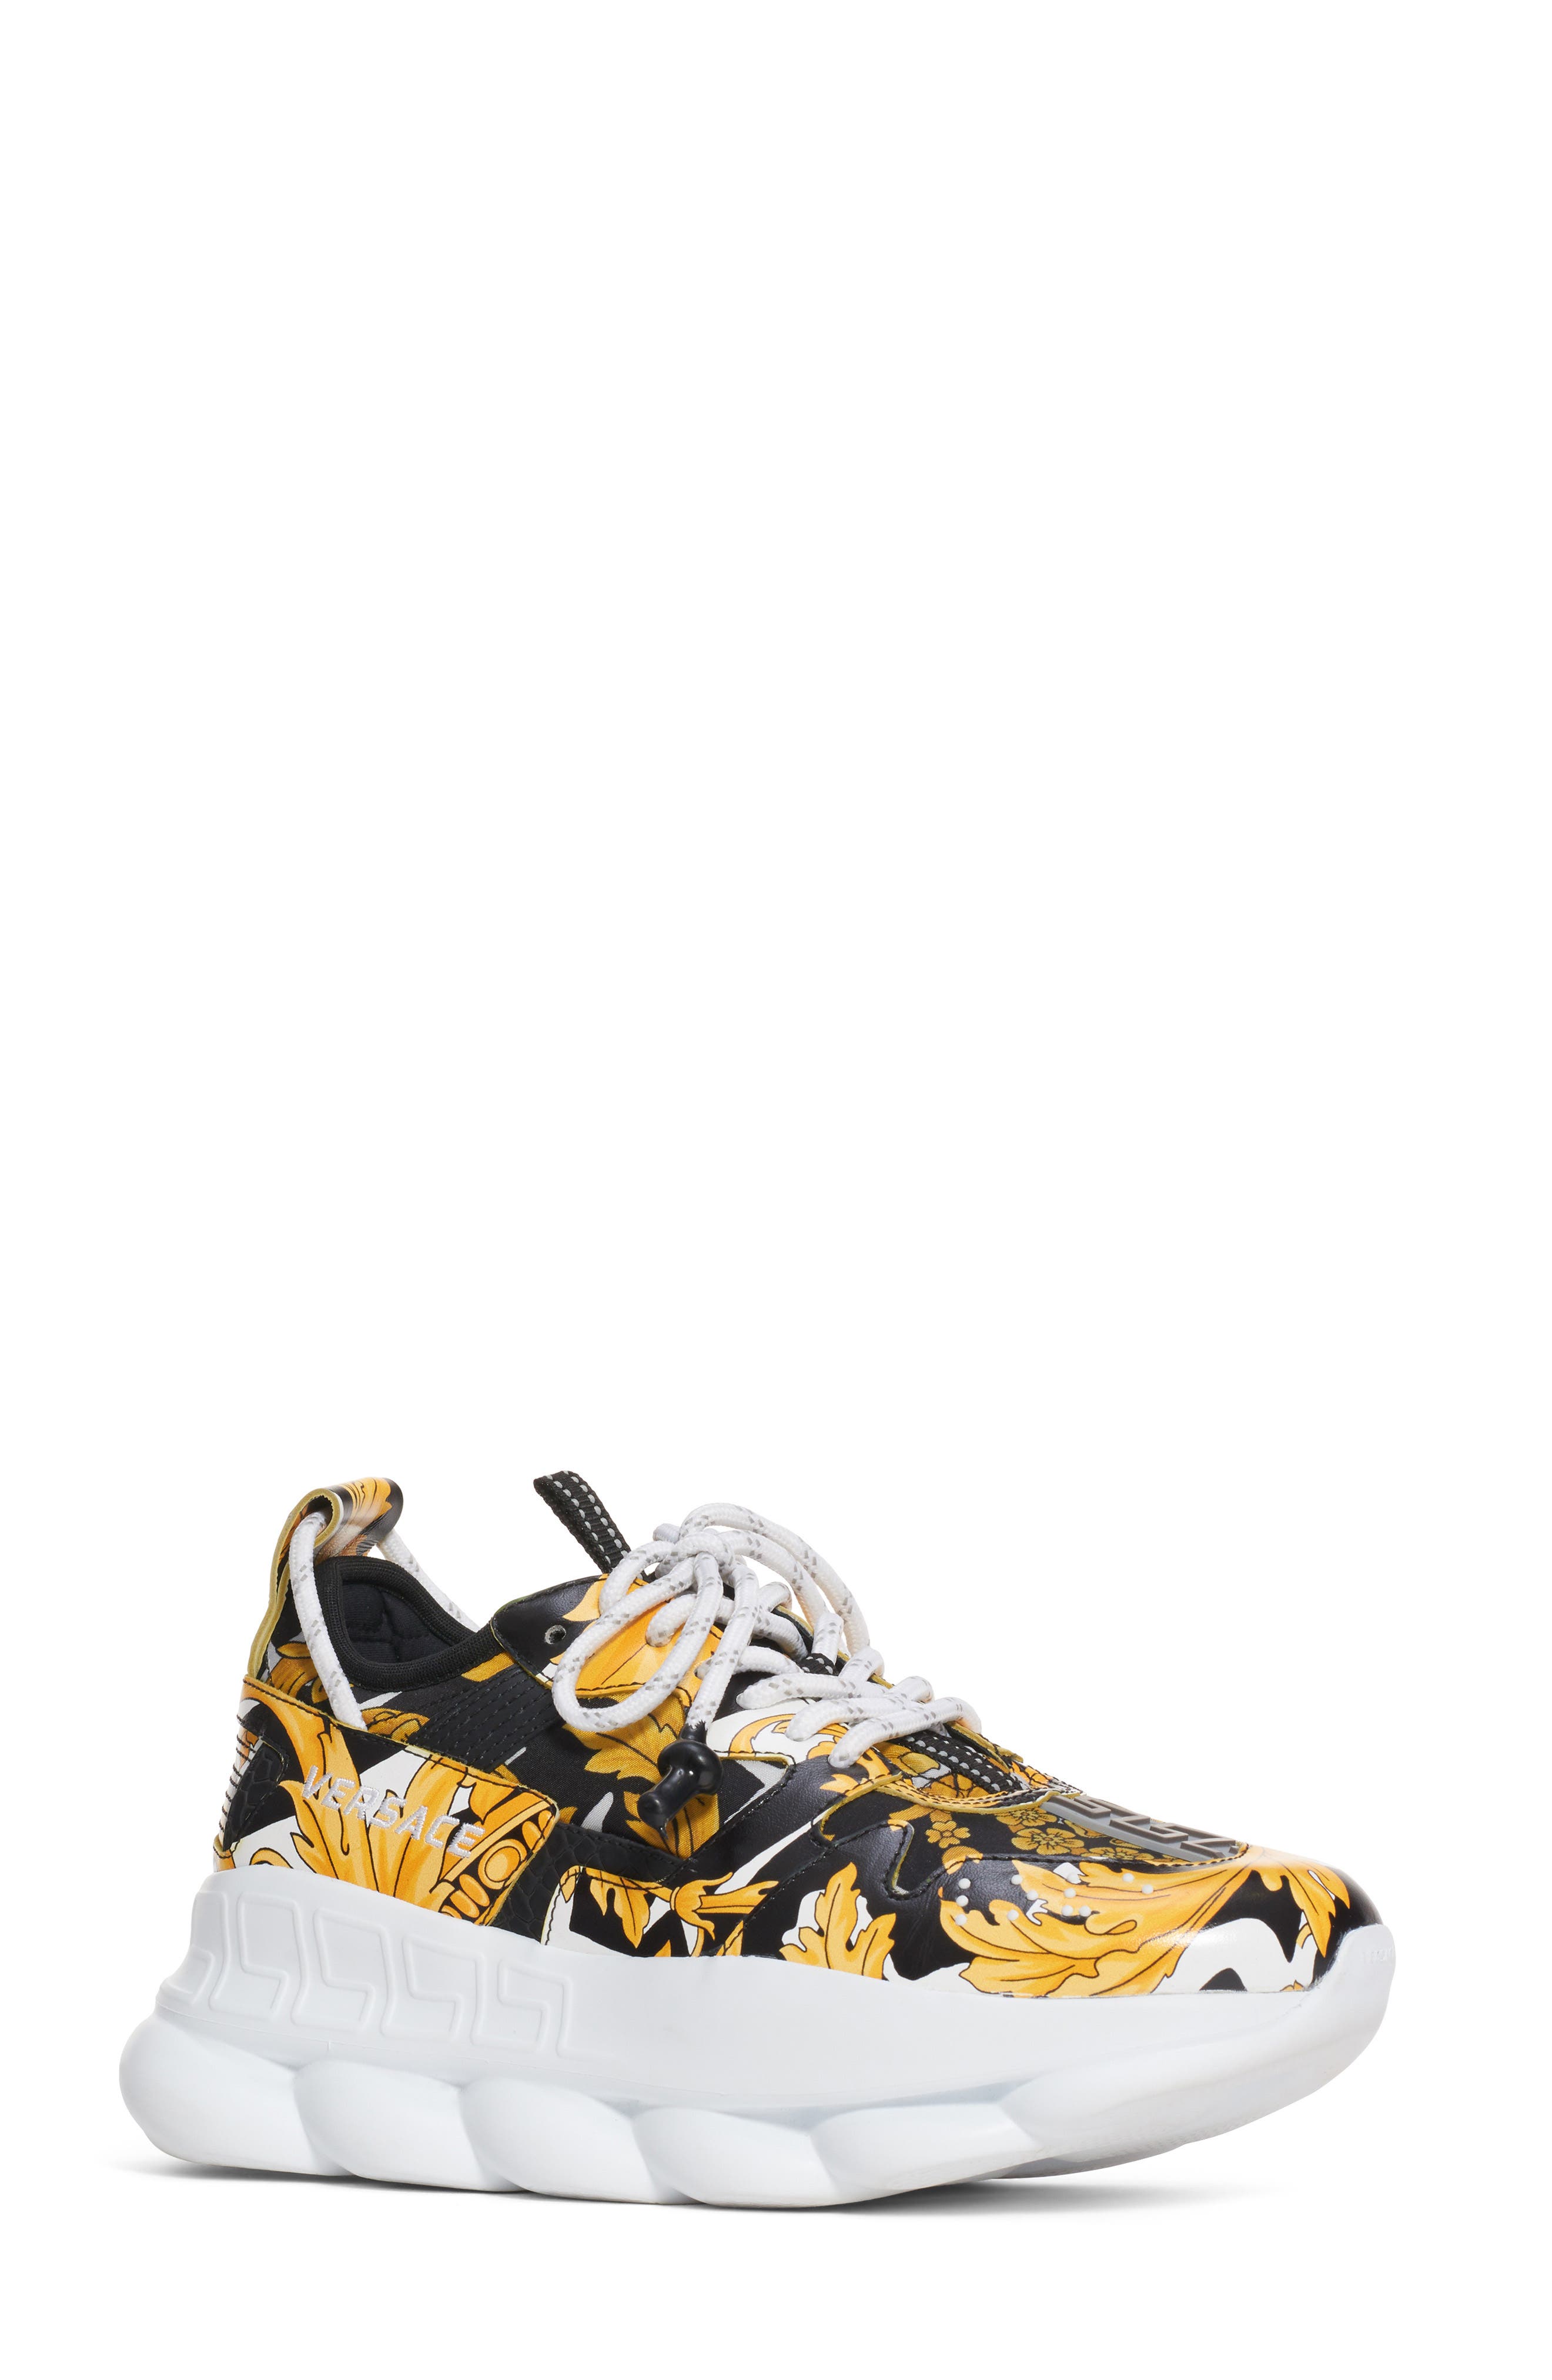 versace chain reaction sneakers on sale